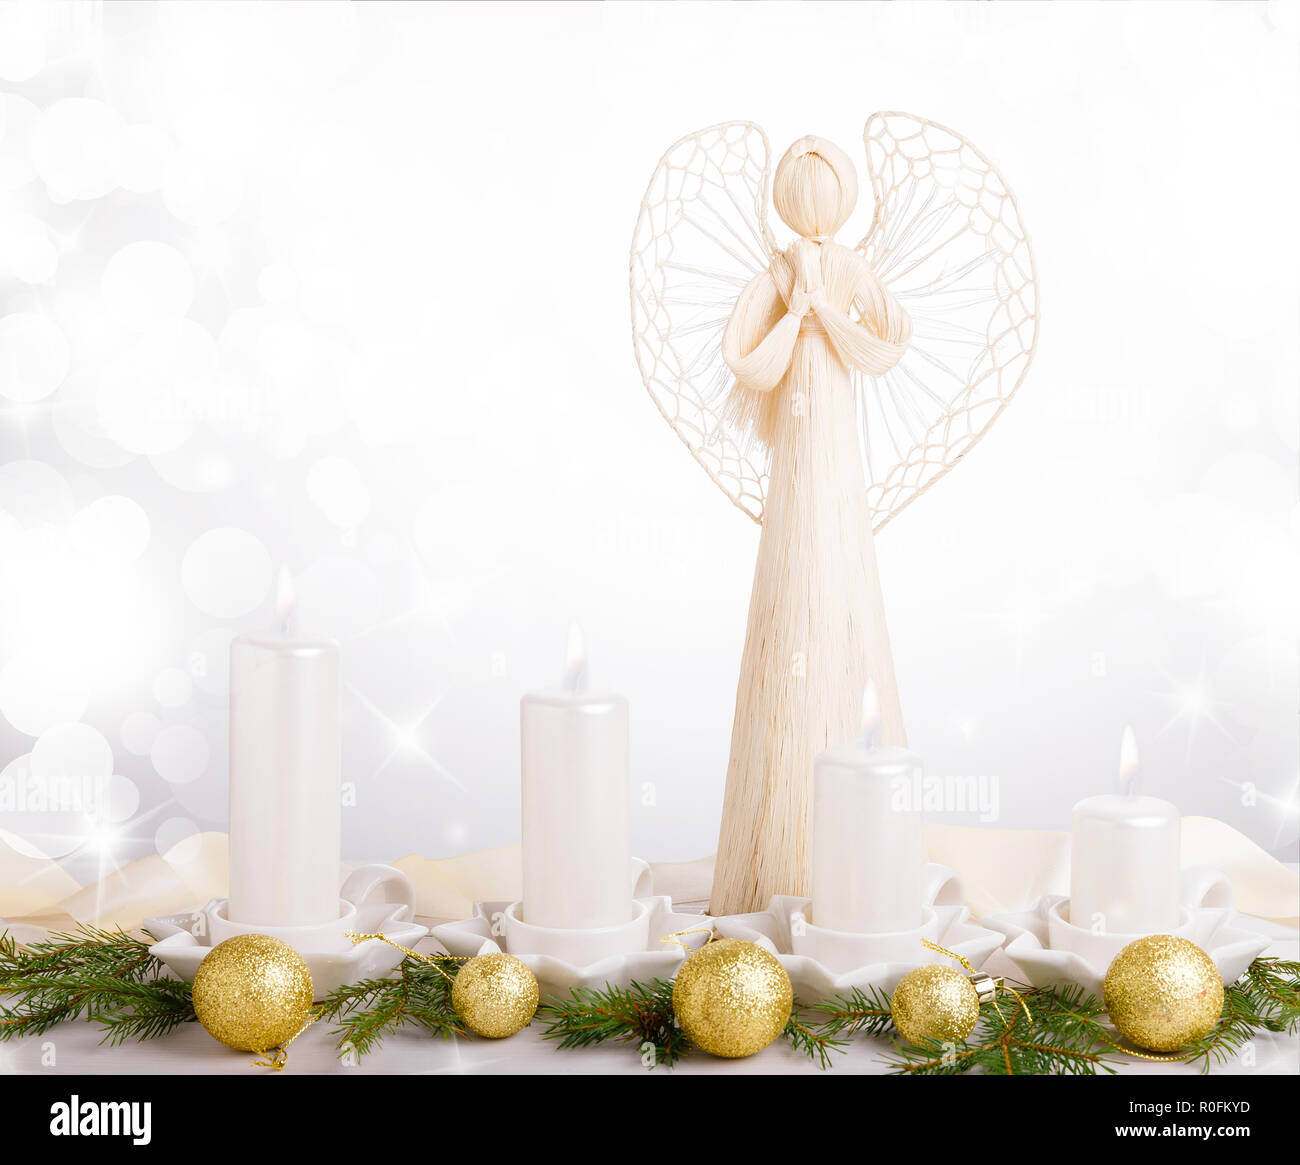 A white angel and four white Advent candles, Christmas tree branches are decorated with golden balls. Stock Photo